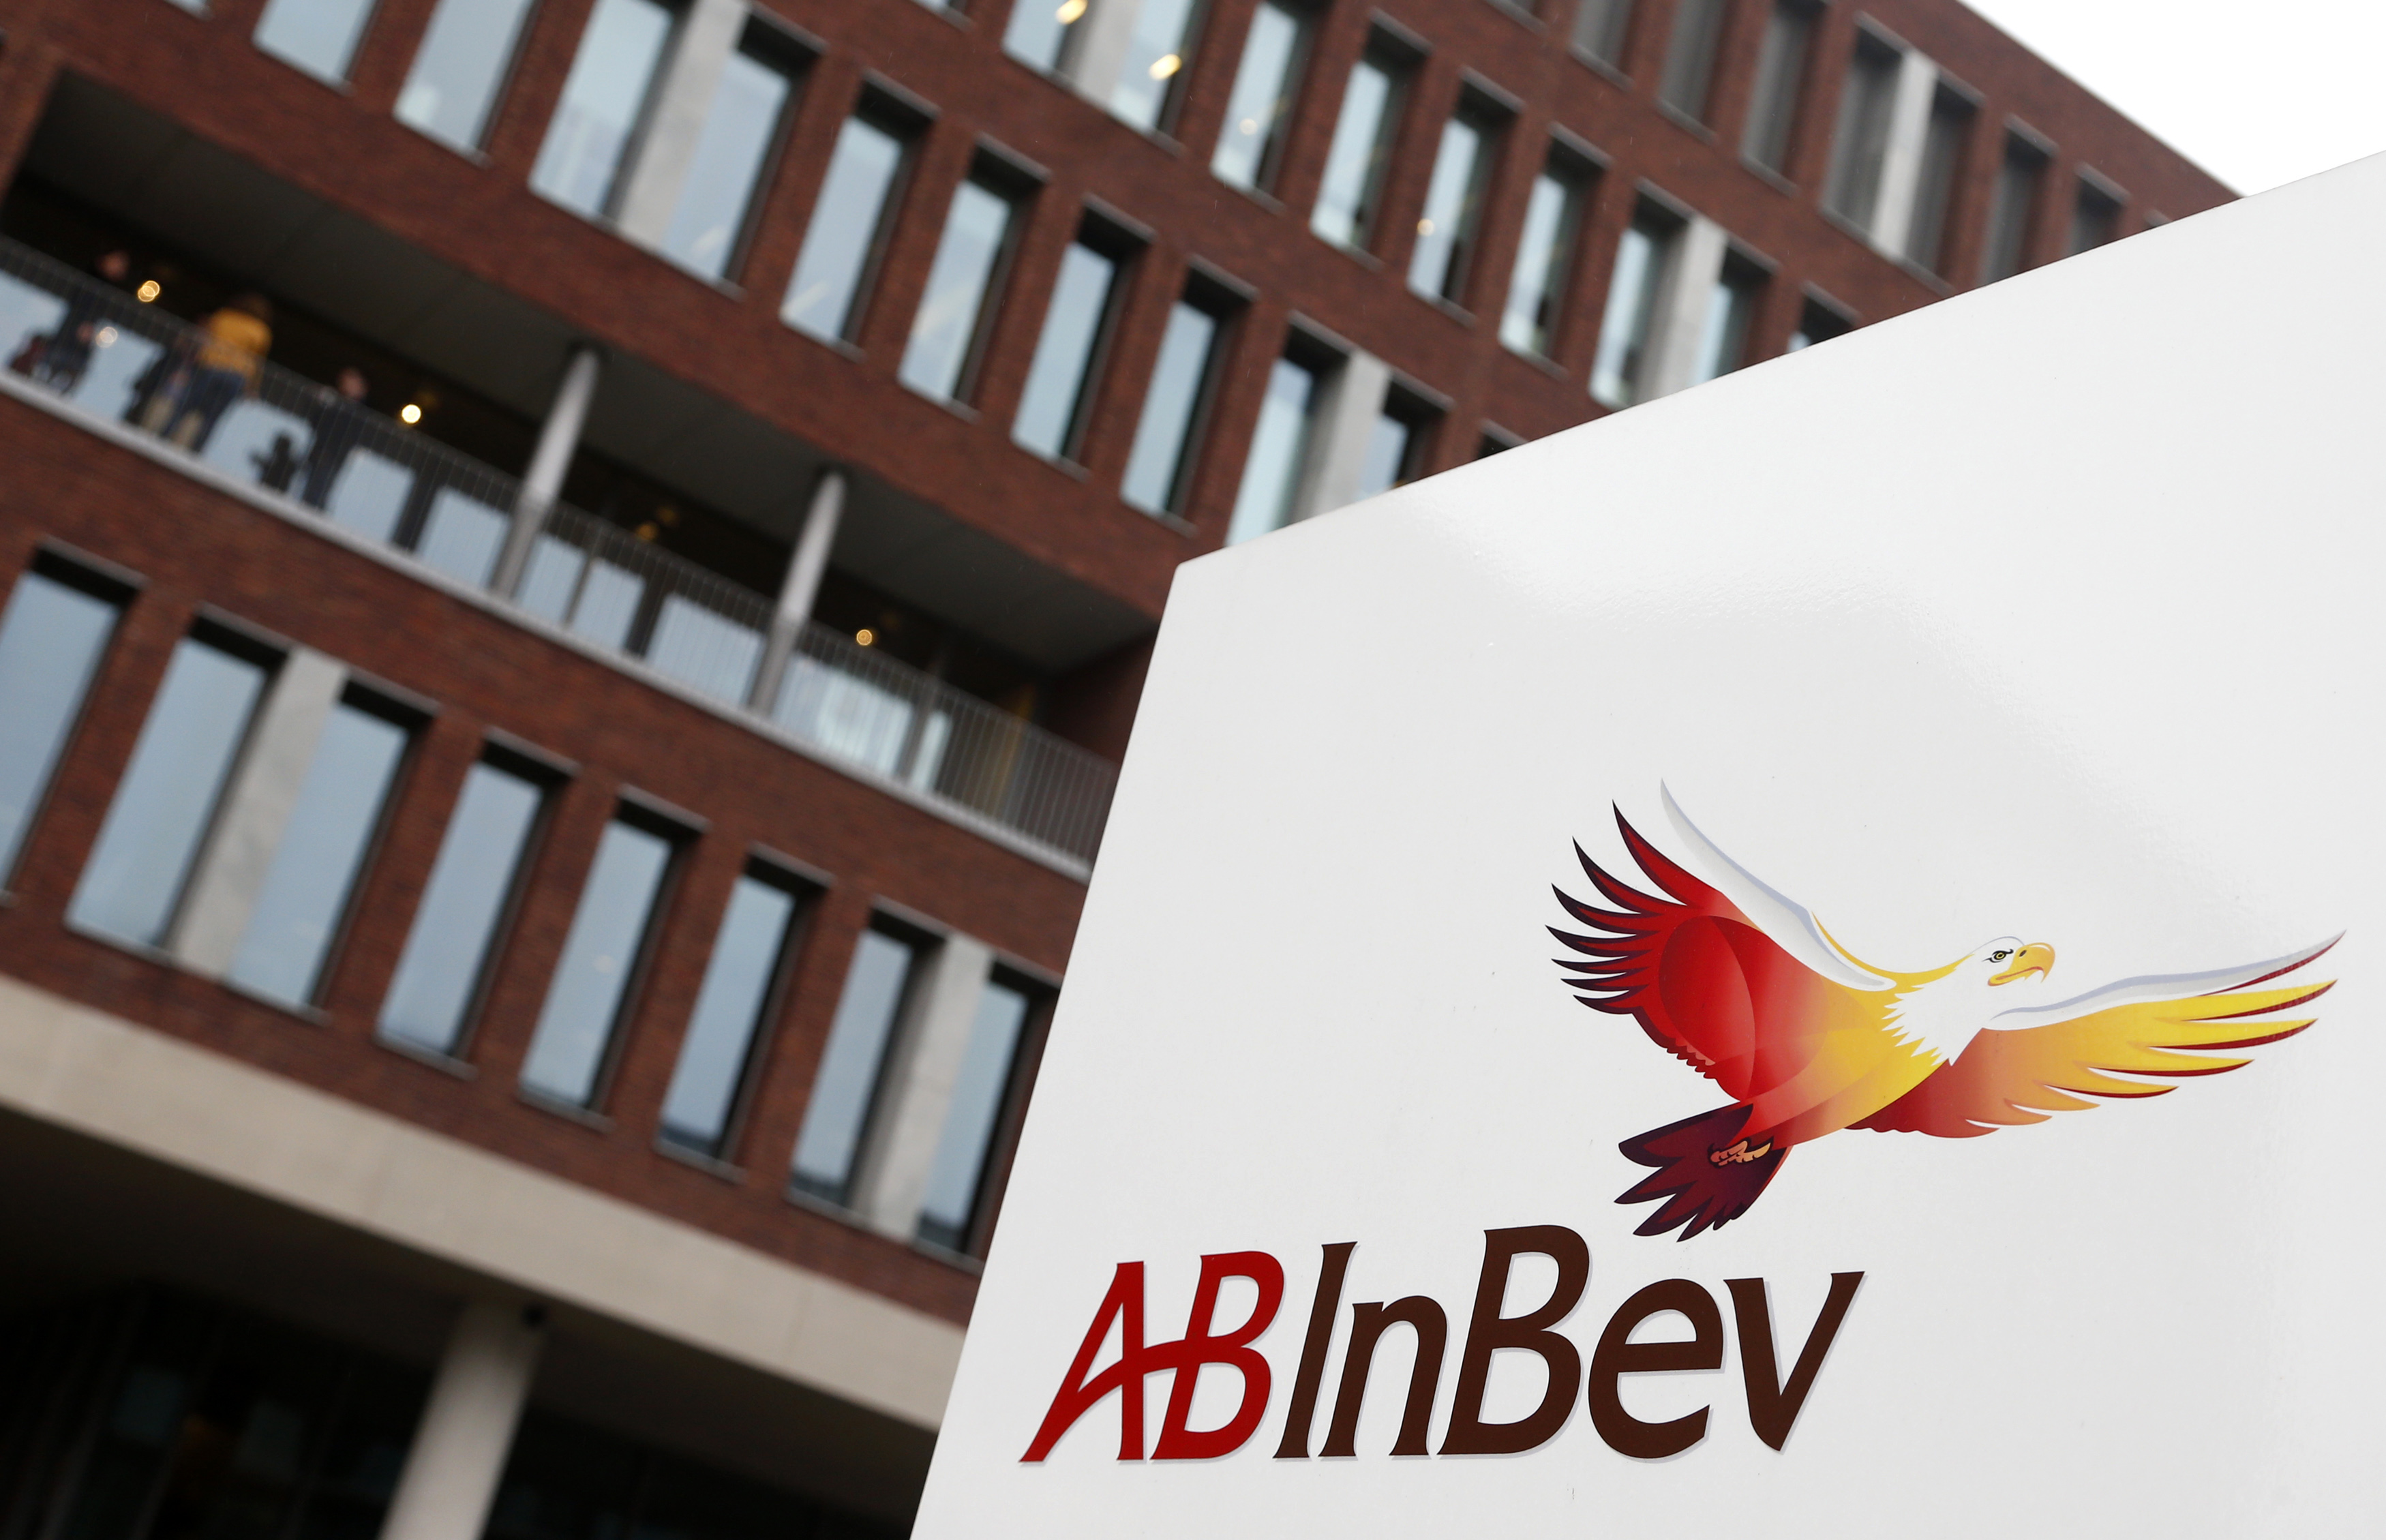 View of Anheuser-Busch InBev logo outside the brewery headquarters in Leuven February 27, 2013. (REUTERS / REUTERS)